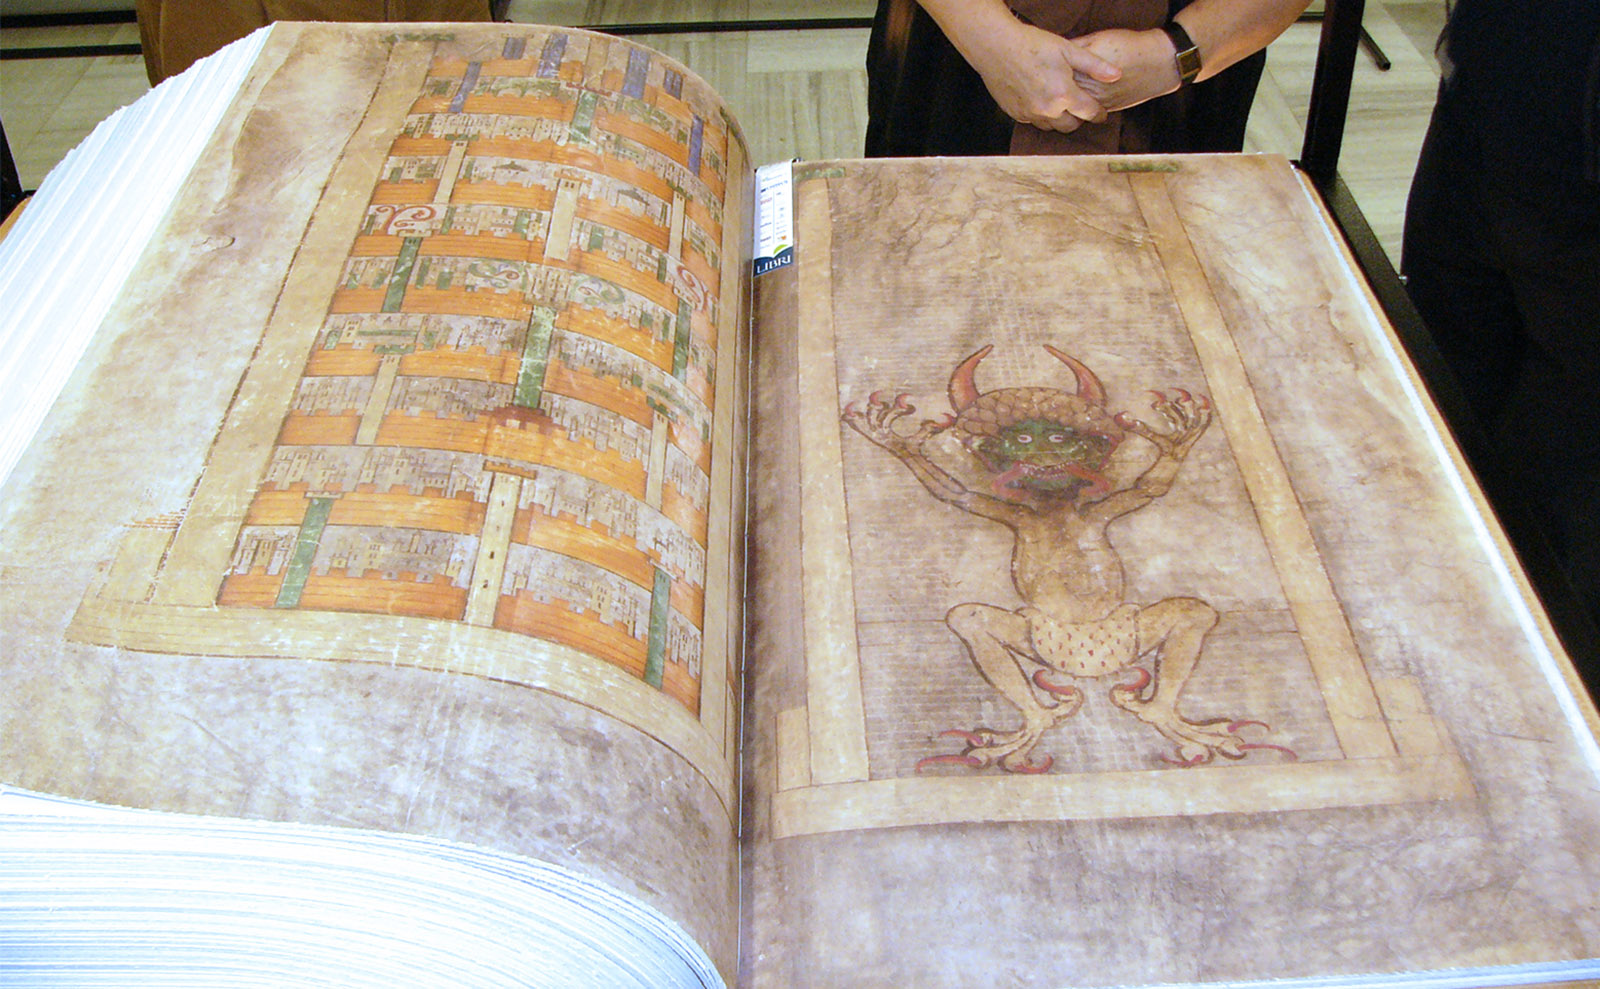 Visiting the Codex Gigas (Devil's Bible) at the National Library of Sweden